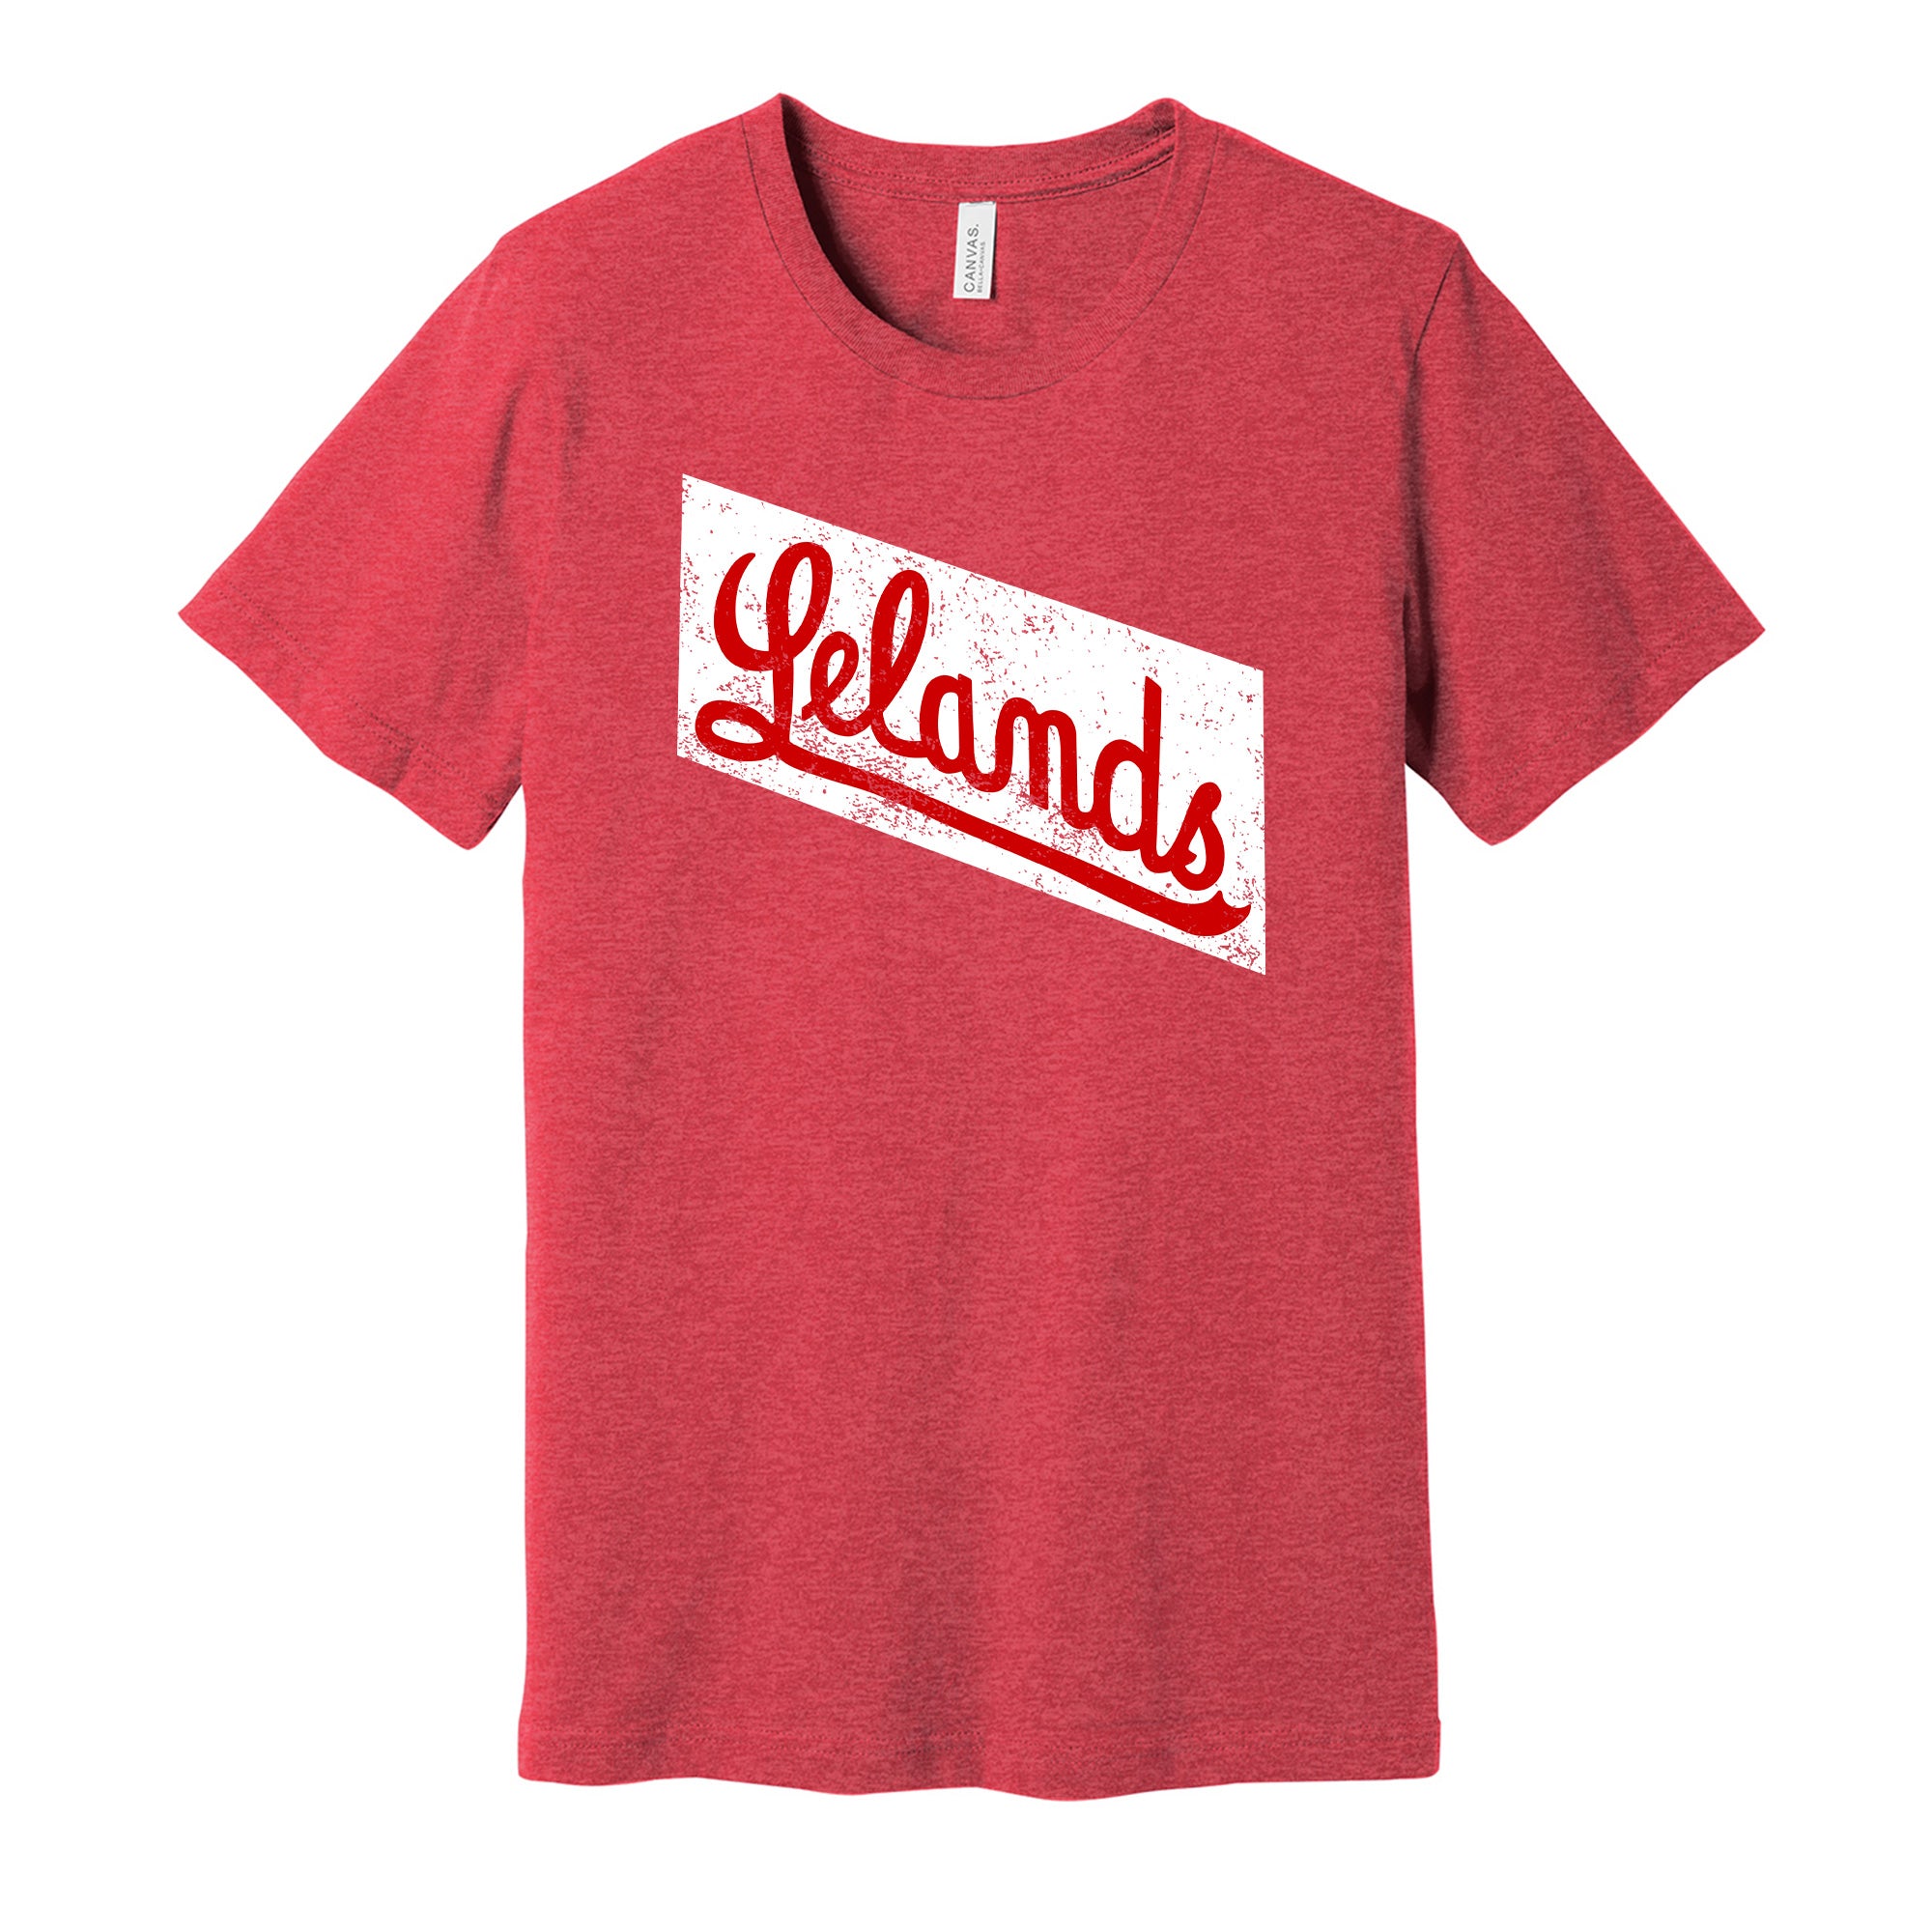 Hyper Than Hype Shirts Chicago Leland Giants Distressed Logo Shirt - Defunct Negro Baseball Team - Celebrate Black Heritage and History - Hyper Than Hype XL / Red Shirt